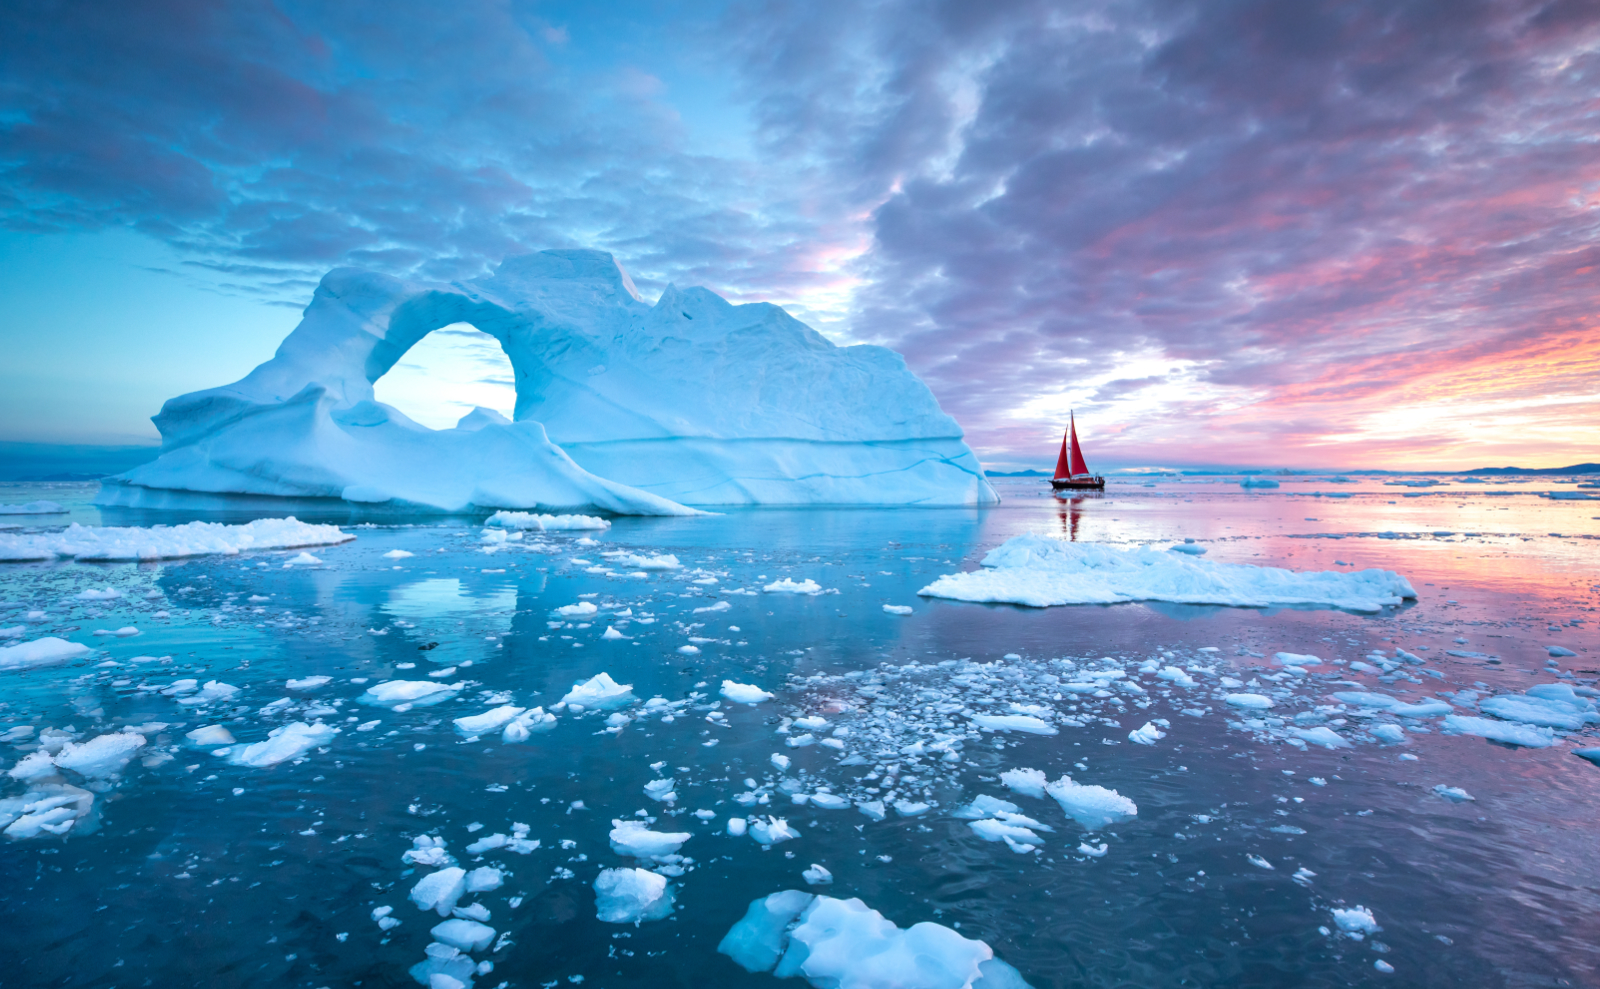 a red sailboat bloats next to an iceberg in the arctic